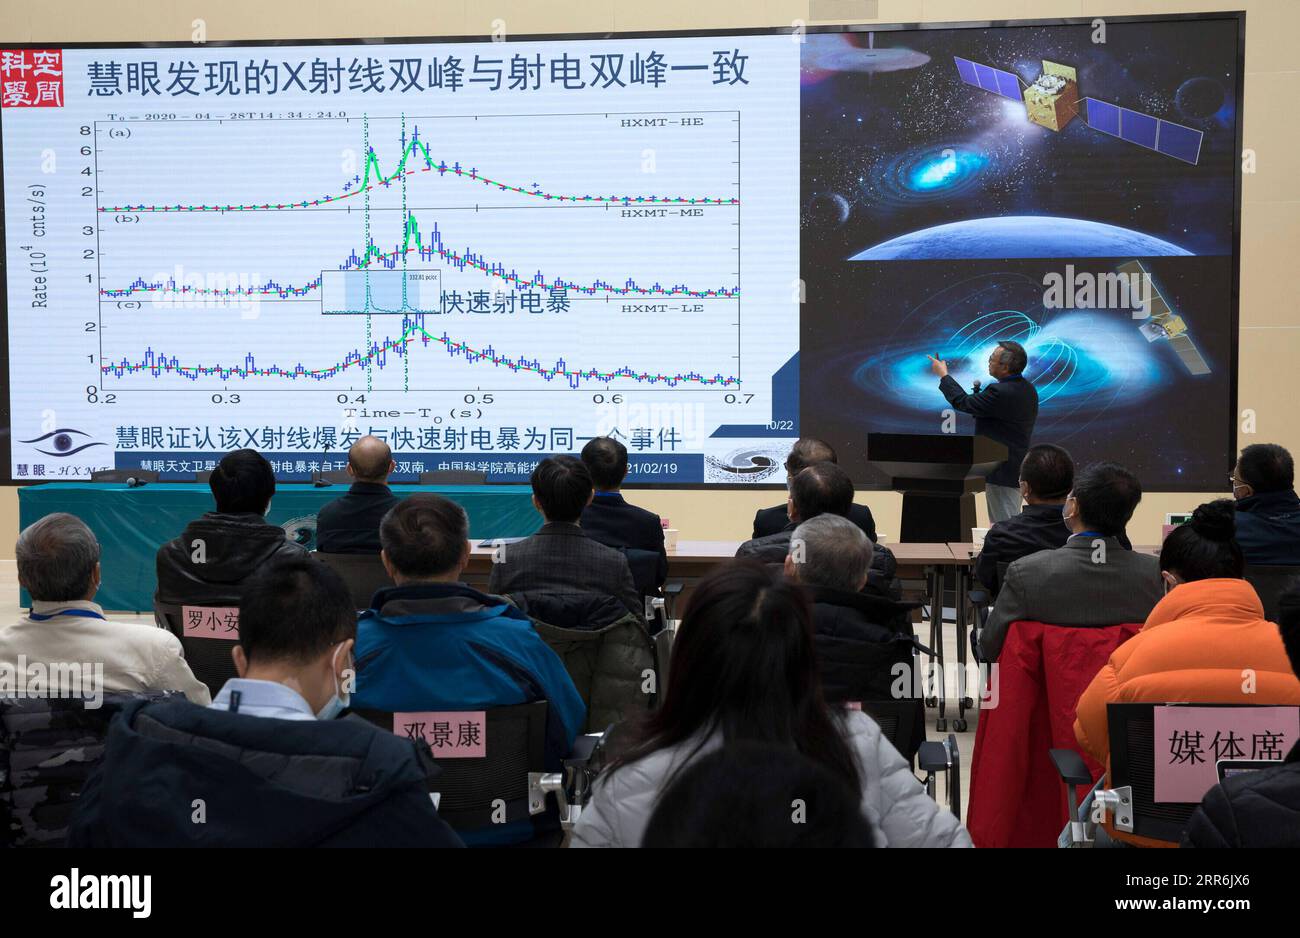 210219 -- BEIJING, Feb. 19, 2021 -- Zhang Shuangnan, lead scientist of China s Hard X-ray Modulation Telescope HXMT, speaks during a press conference at the Institute of High Energy Physics under the Chinese Academy of Sciences in Beijing, capital of China, Feb. 19, 2021. China s HXMT, the country s space science satellite also known as Insight, has found that a fast radio burst signal detected last year came from a magnetar in the Milky Way, Chinese scientists announced Friday. The discovery marked a milestone in understanding the nature of the mysterious signal emanating from the universe, t Stock Photo